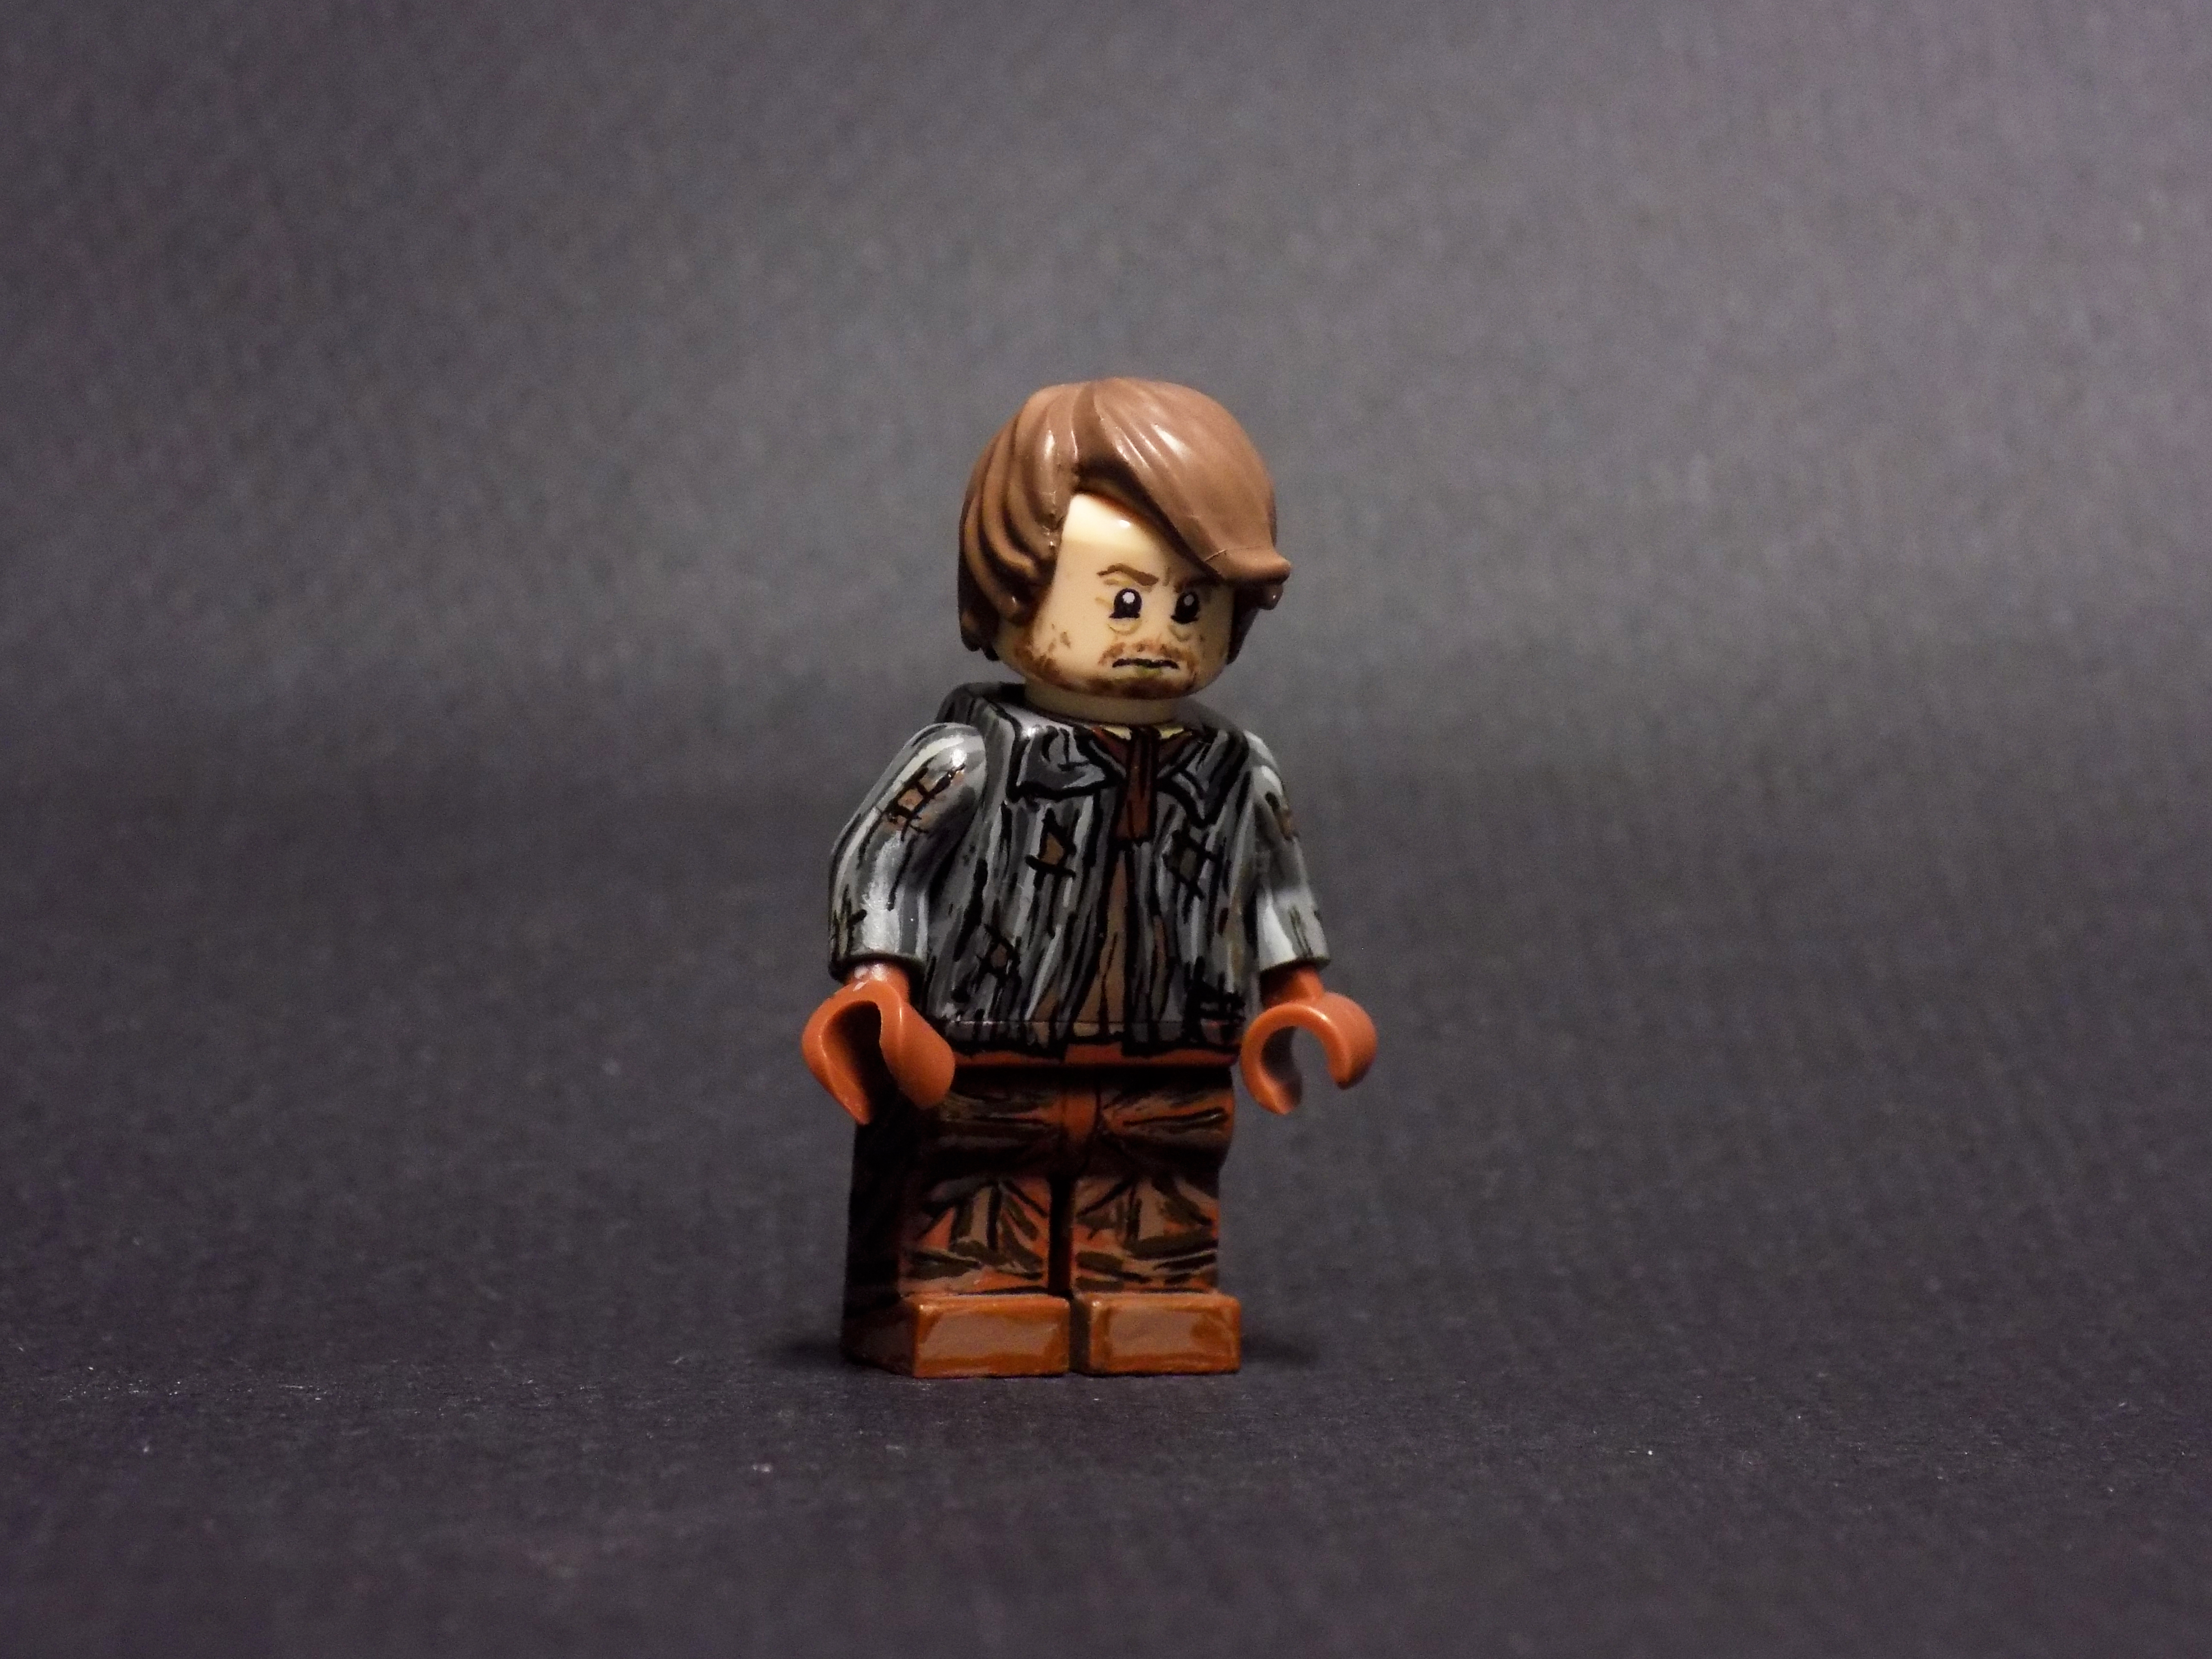 Lego Game of Thrones by Billy Riner